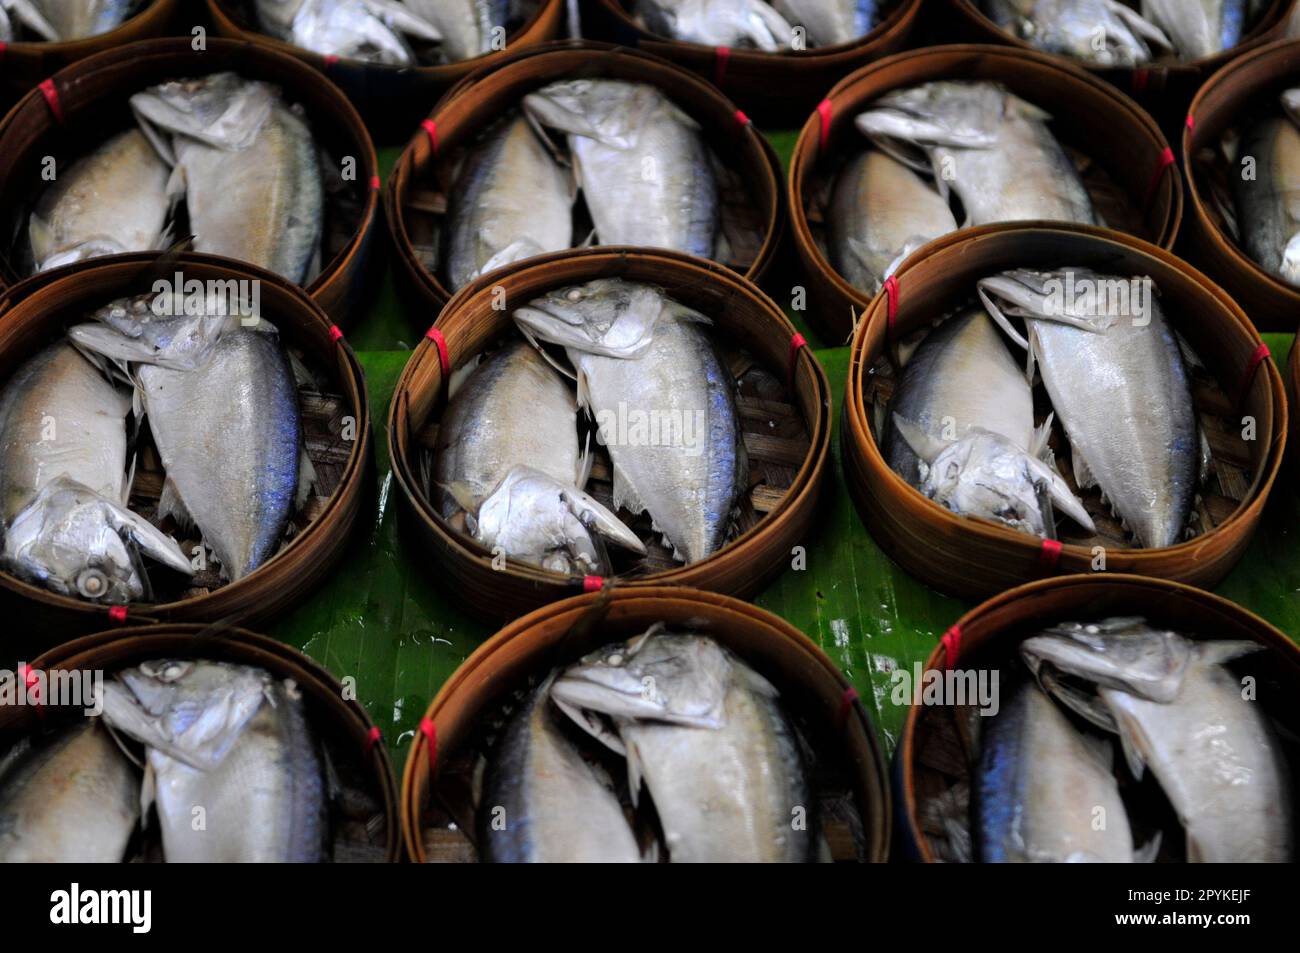 Steamed Thai Mackerel fish from Gulf of Thailand in bamboo basket for sale at the Mae Klong Railway Market Southwest  of Bangkok, Thailand. Stock Photo